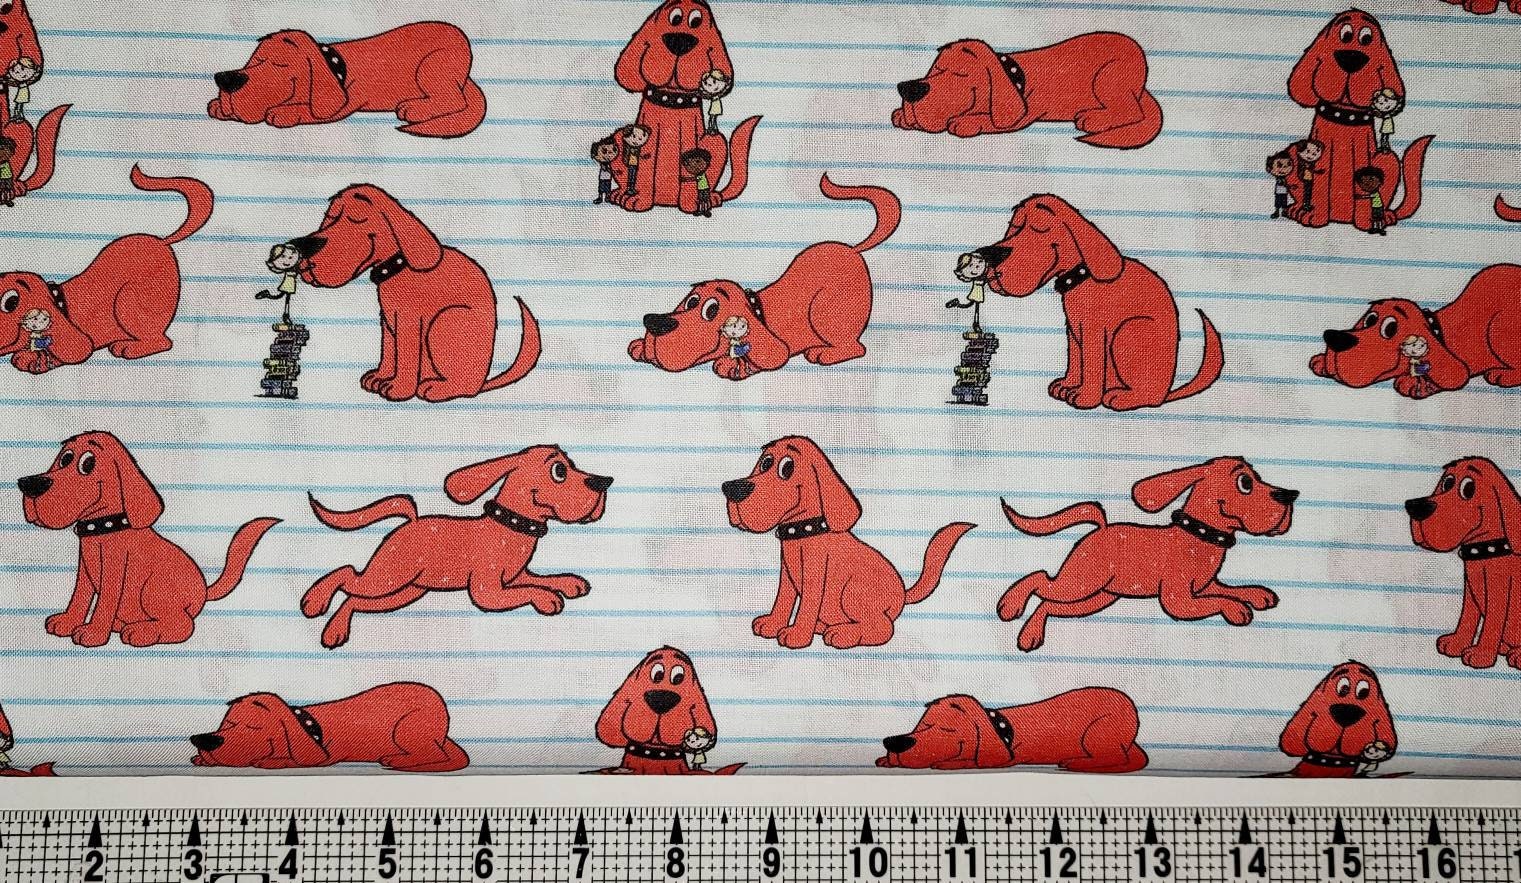 The Red Big Dog Stickers For Kids, 25 Pcs, Vinyl Decals Birthday